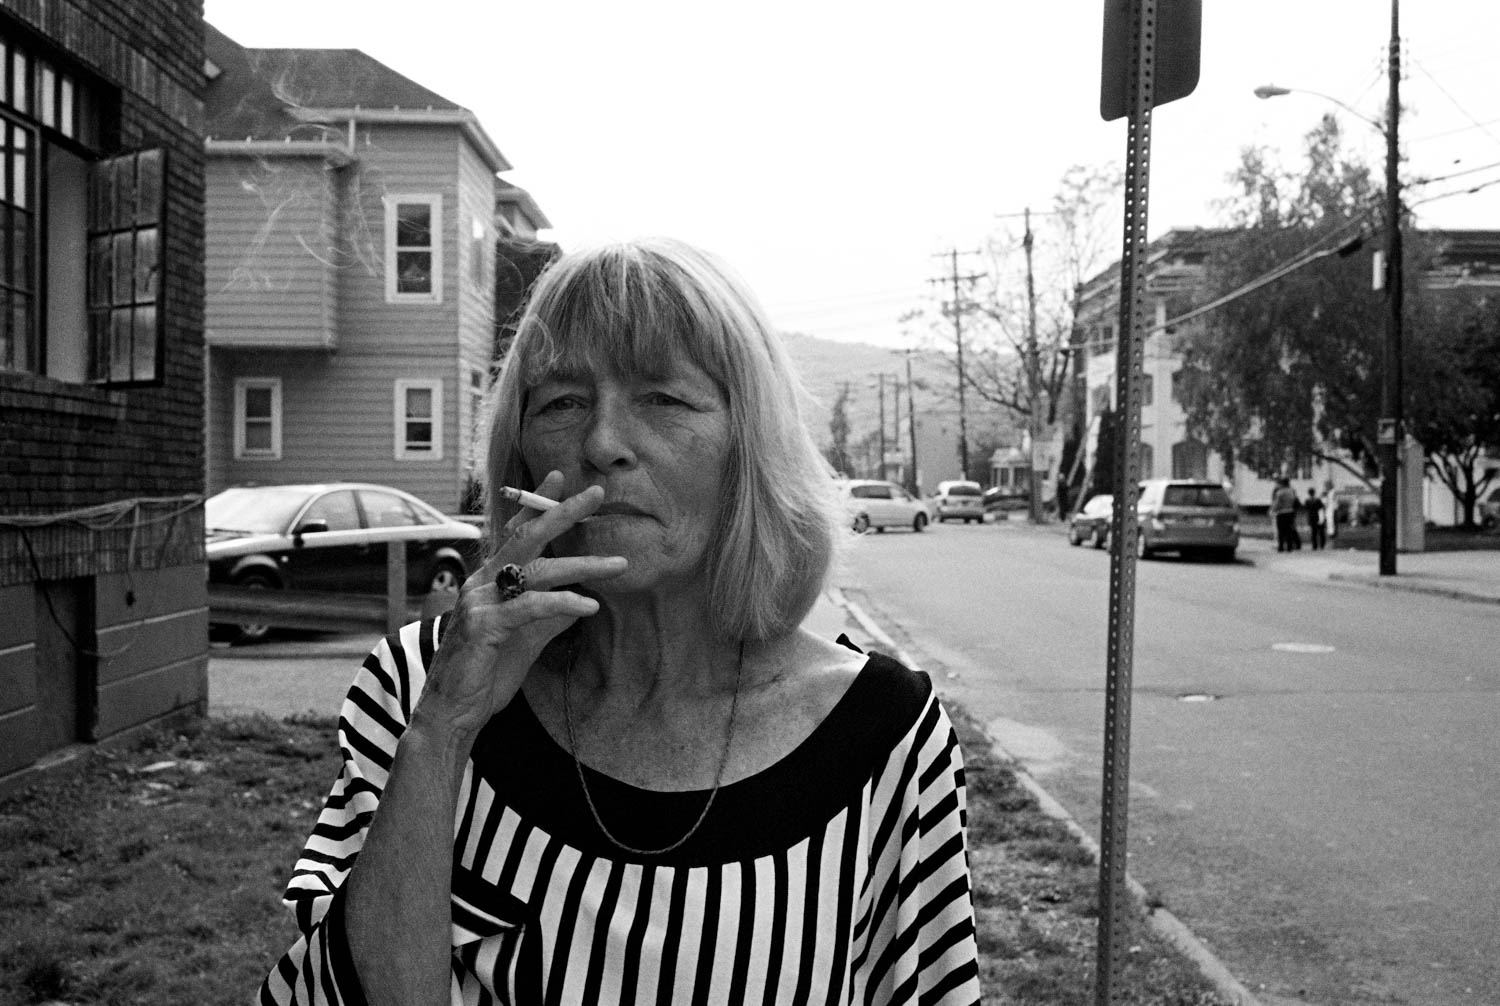 Black and white street photograph of an older woman in a vertical stripe shirt smoking a cigarette in Binghamton, NY.